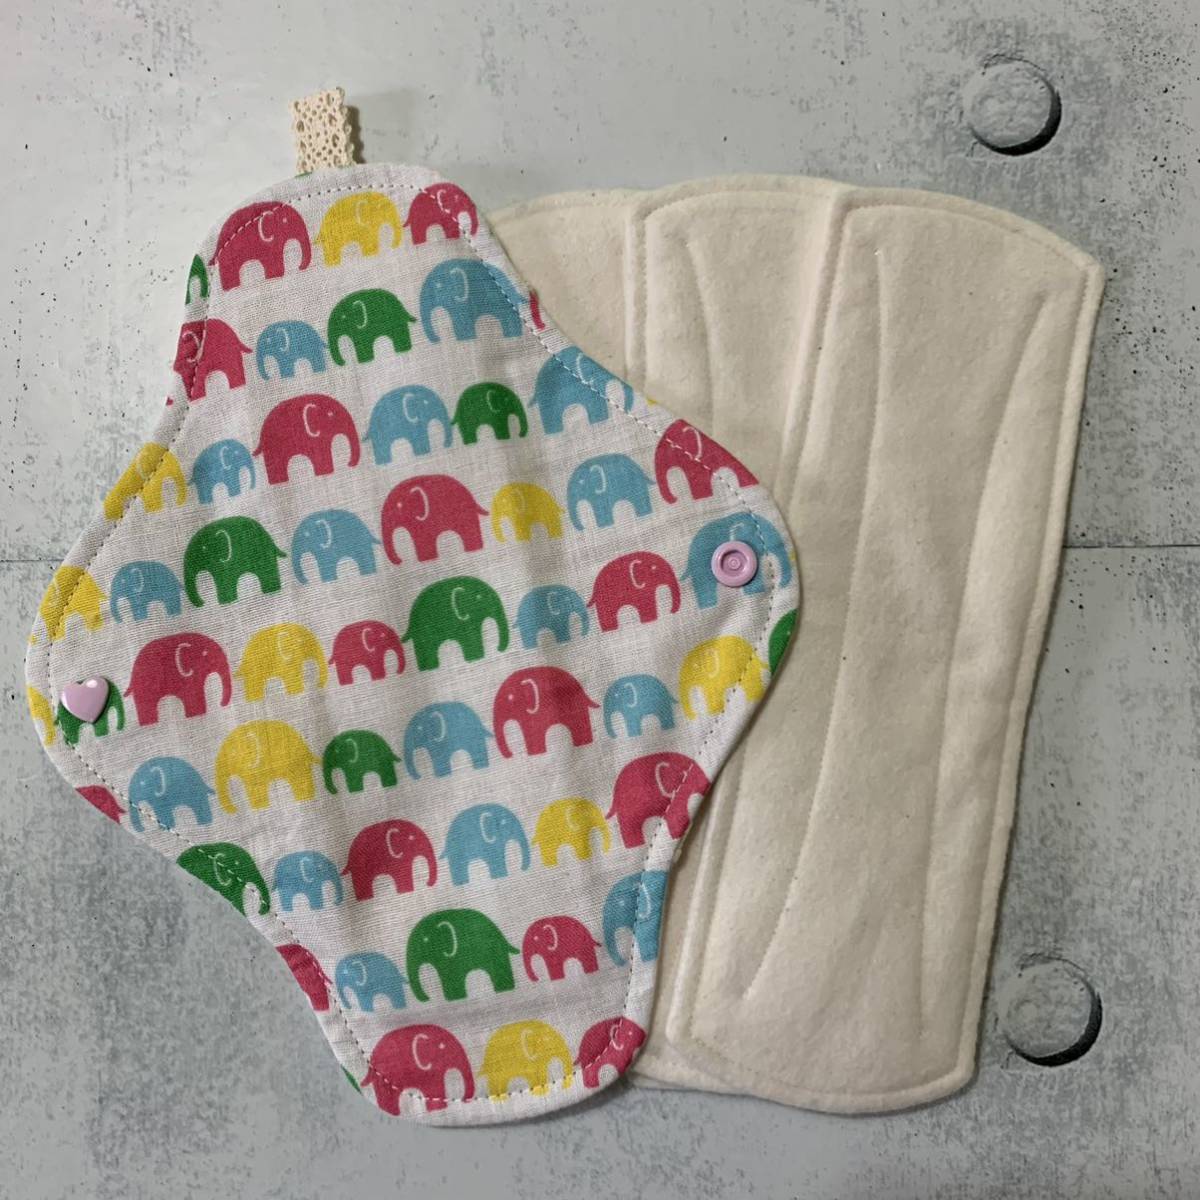  hand made fabric napkin holder 23cm.5 layer pad 3 sheets elephant pattern pra snap /W gauze * less . white flannel 